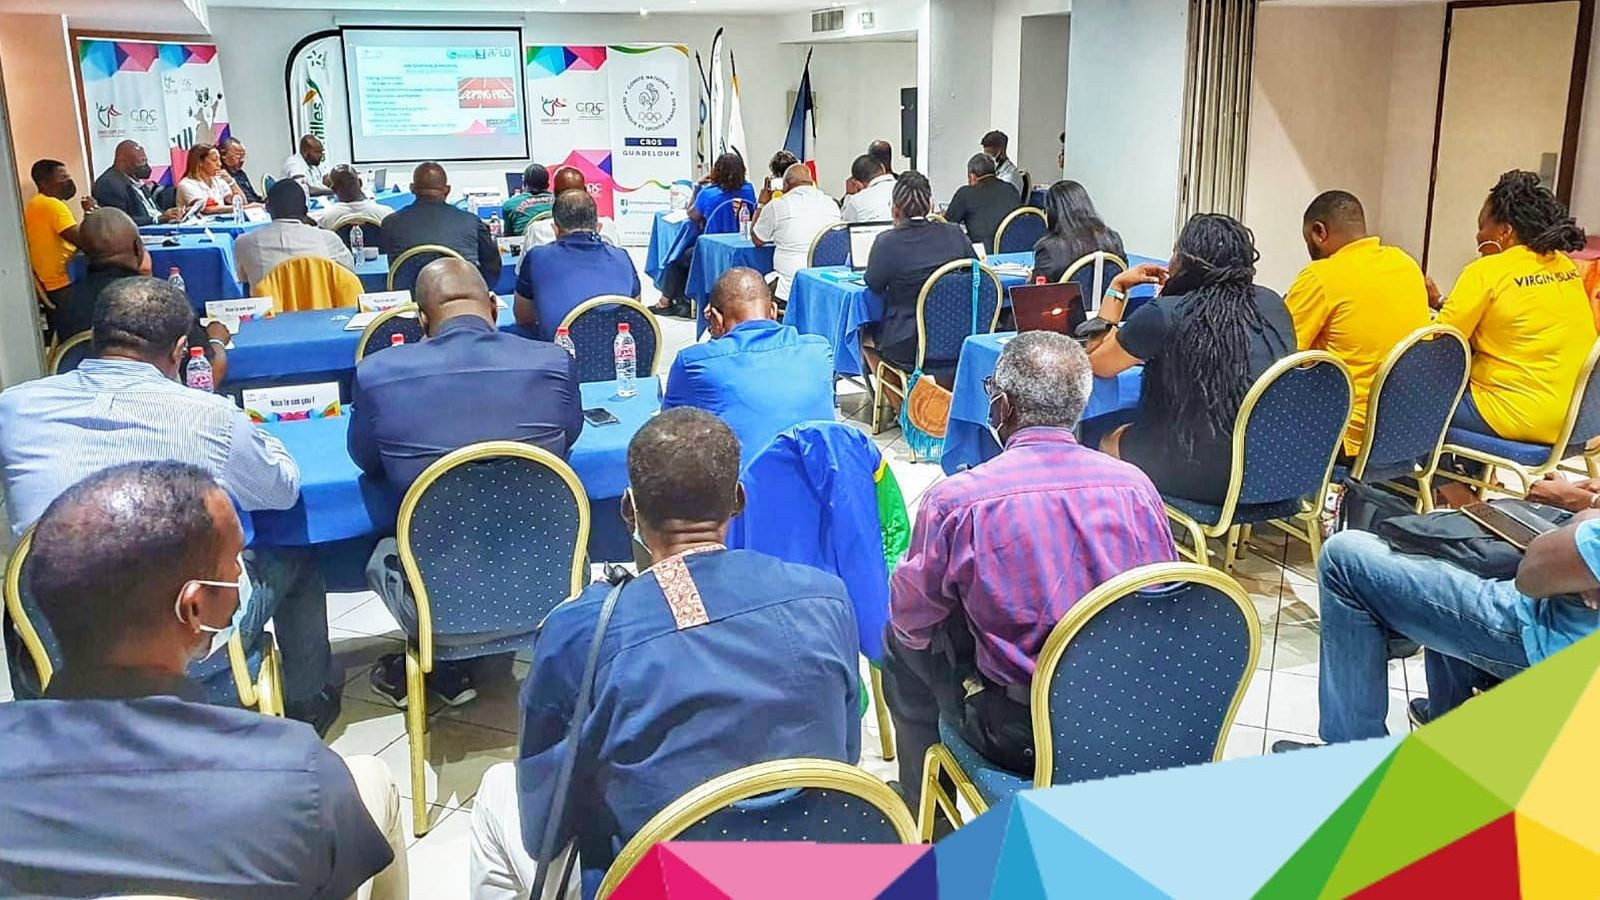 Many representatives of countries due to compete at this year's Caribbean Games attended the Chef de Mission Seminar in Guadeloupe ©CANOC